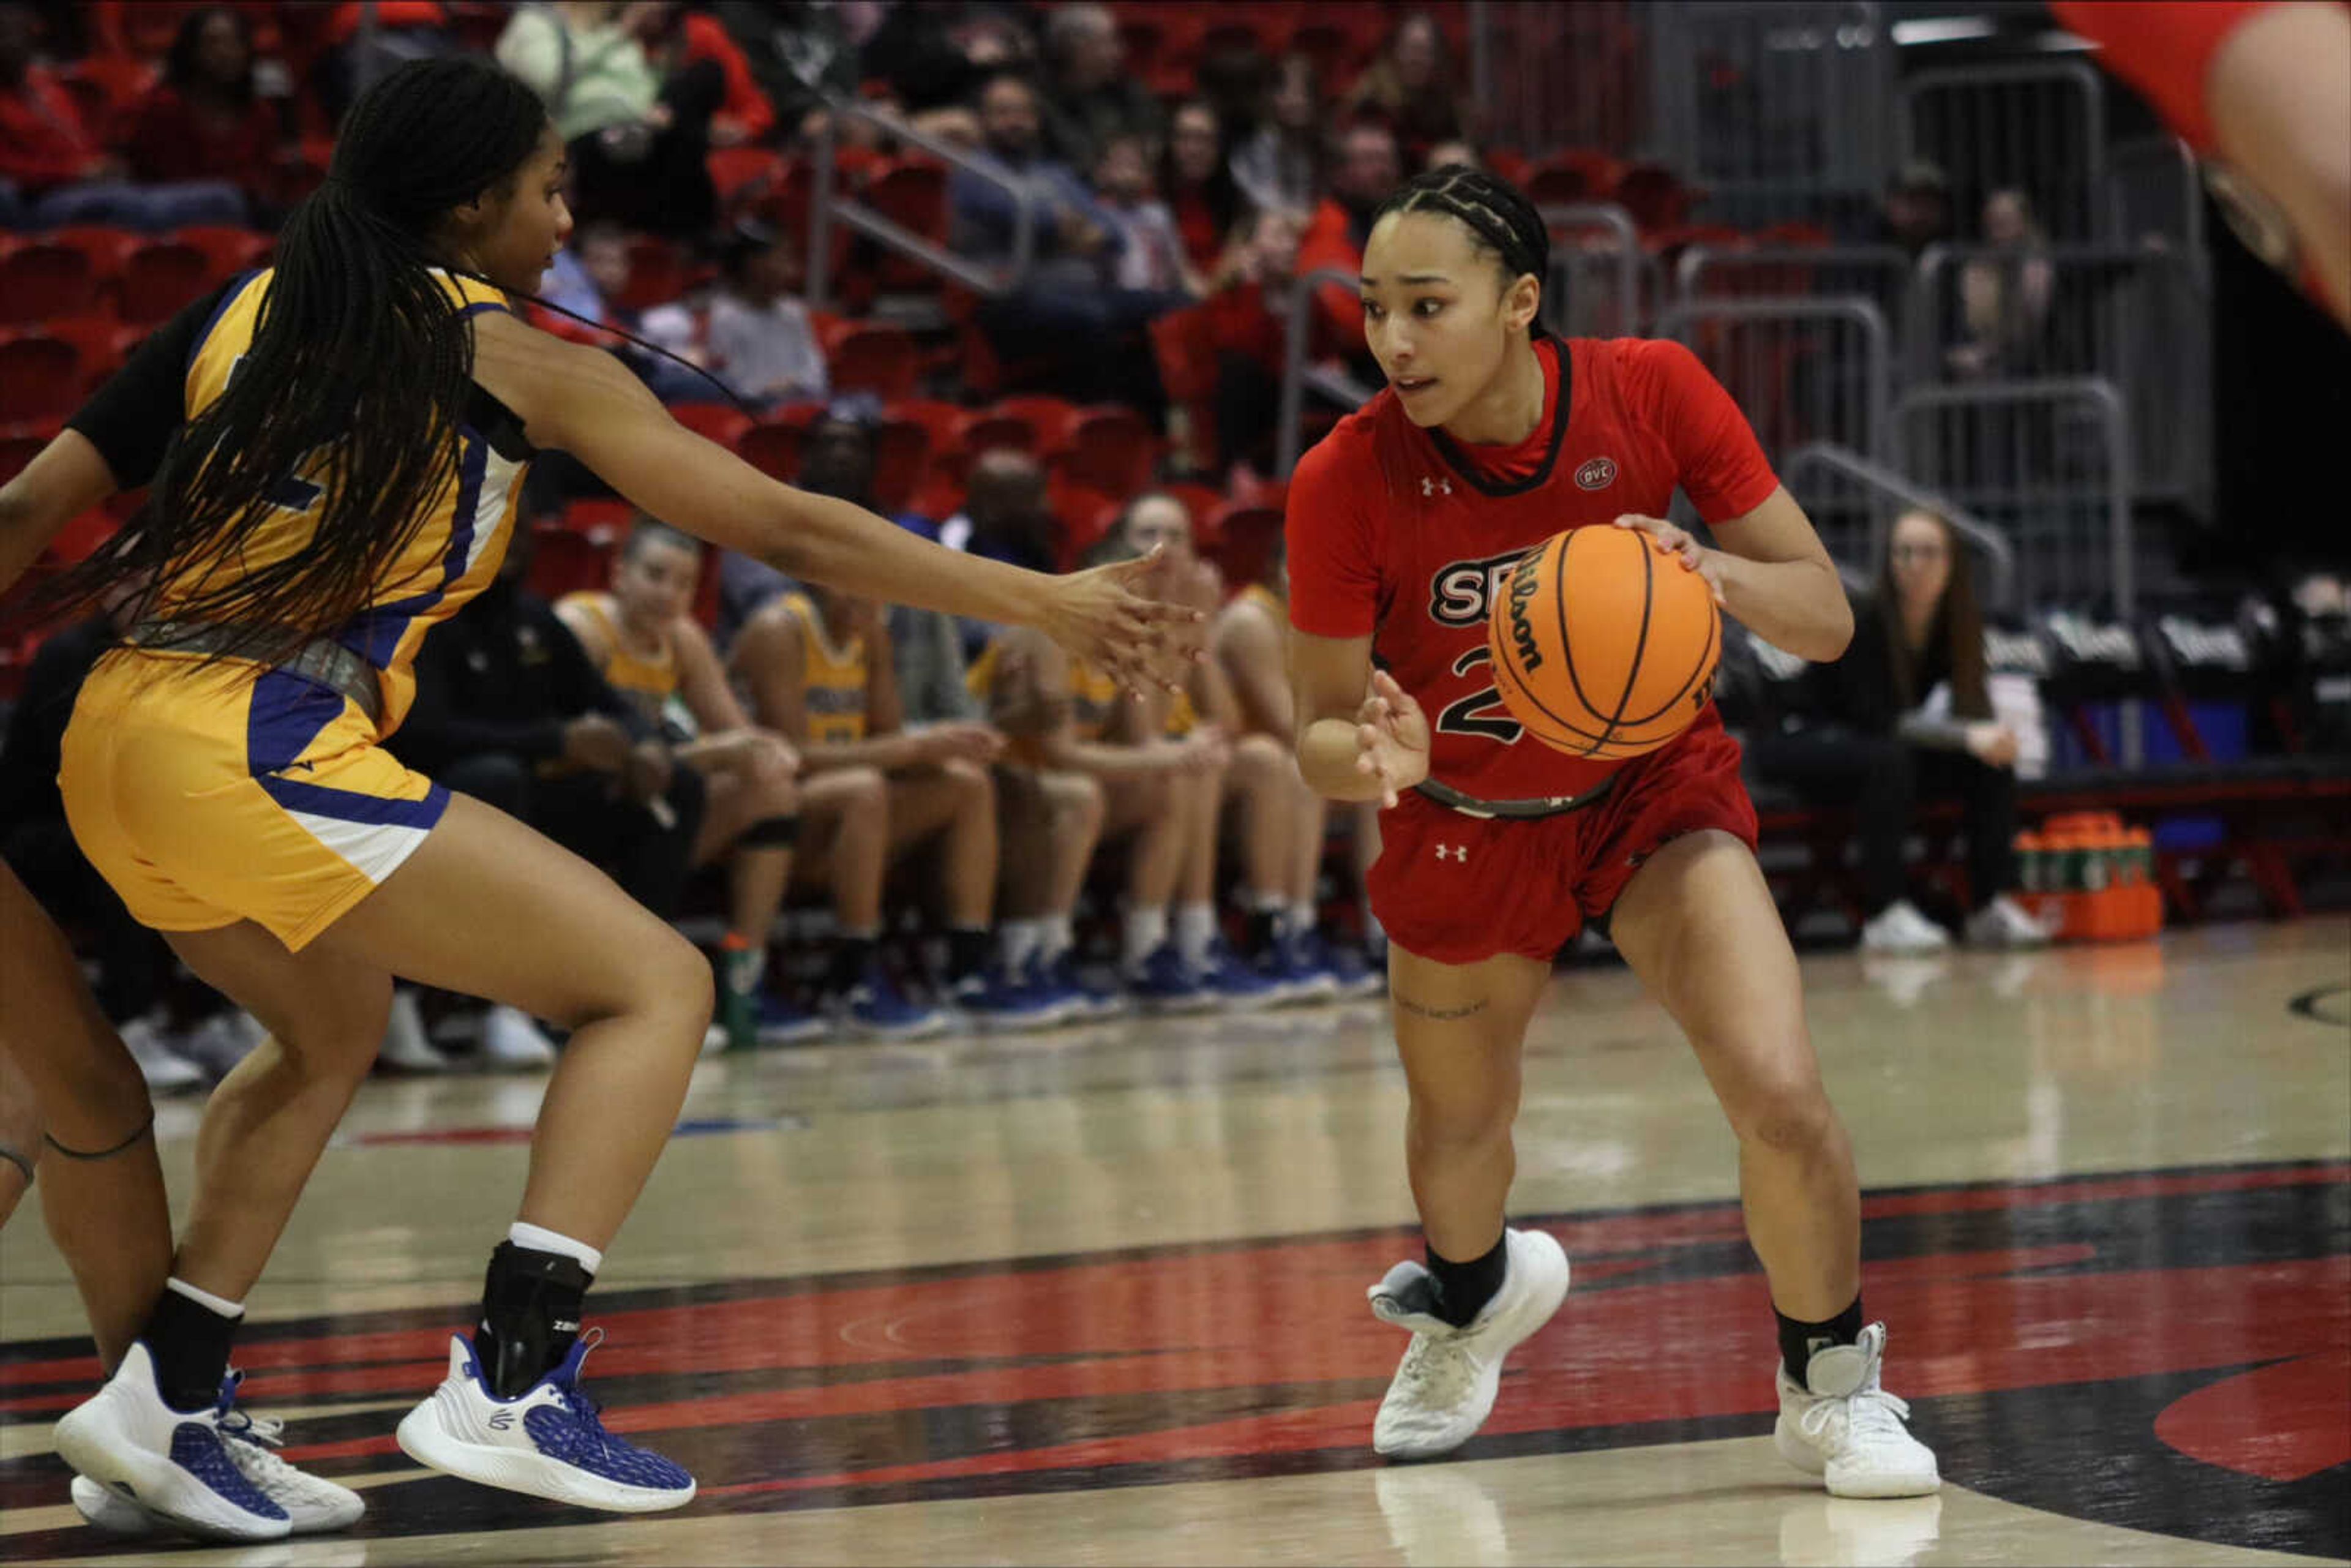 Women’s basketball shows physicality and grit in win over Morehead State